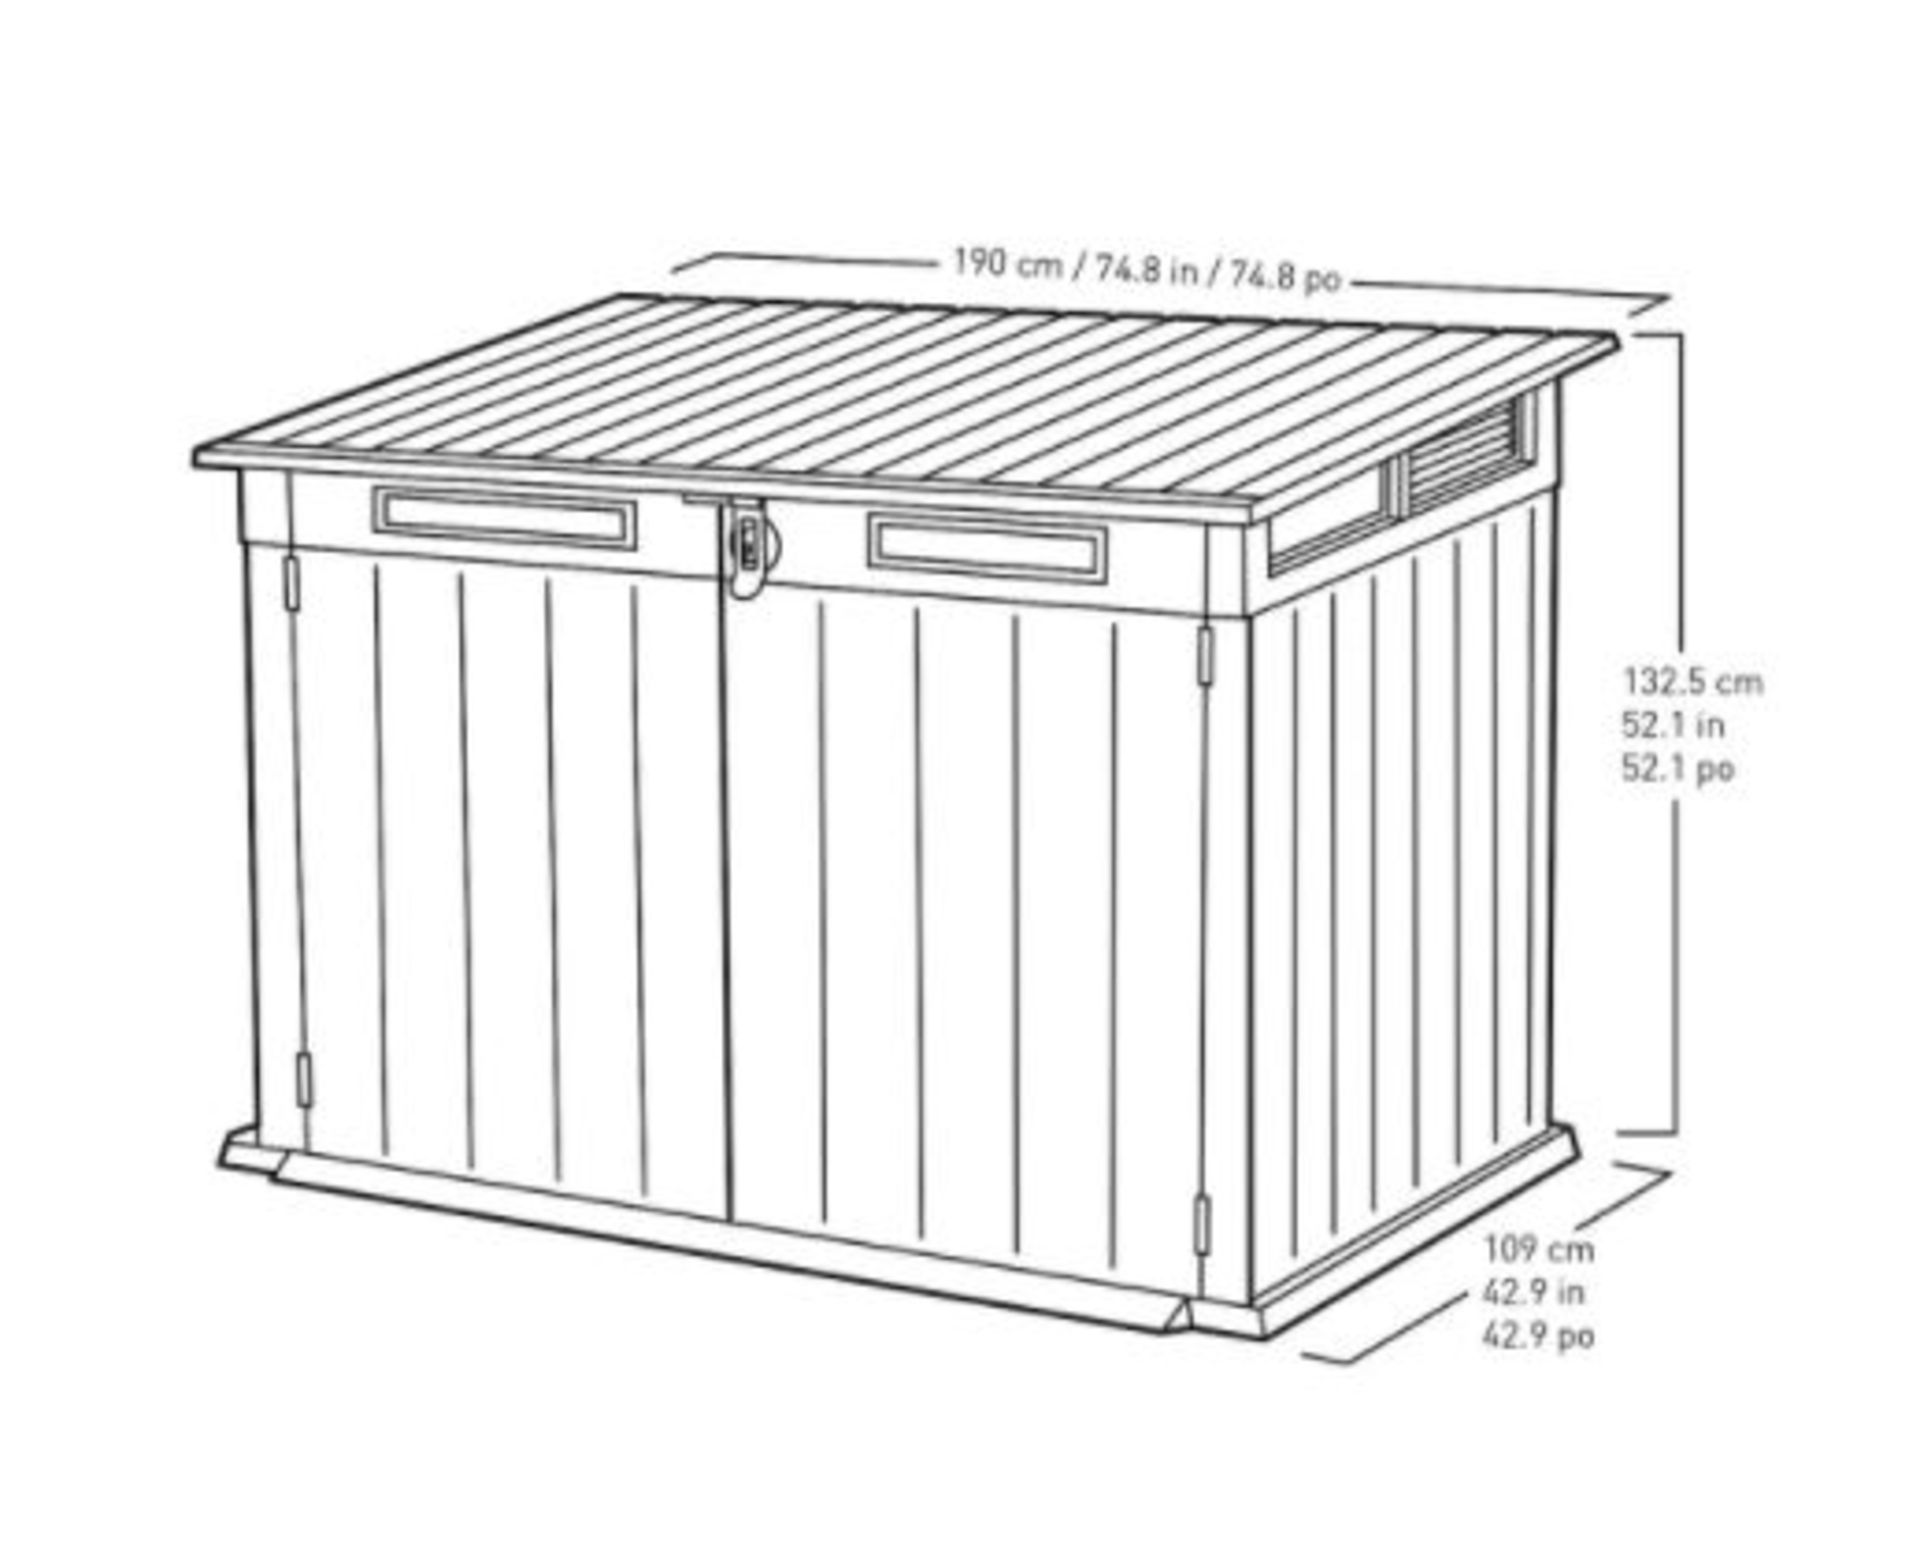 1x Keter Premier Jumbo Outdoor Plastic Garden Storage Shed Grey RRP £385. Piston Assisted Lid And - Image 6 of 12